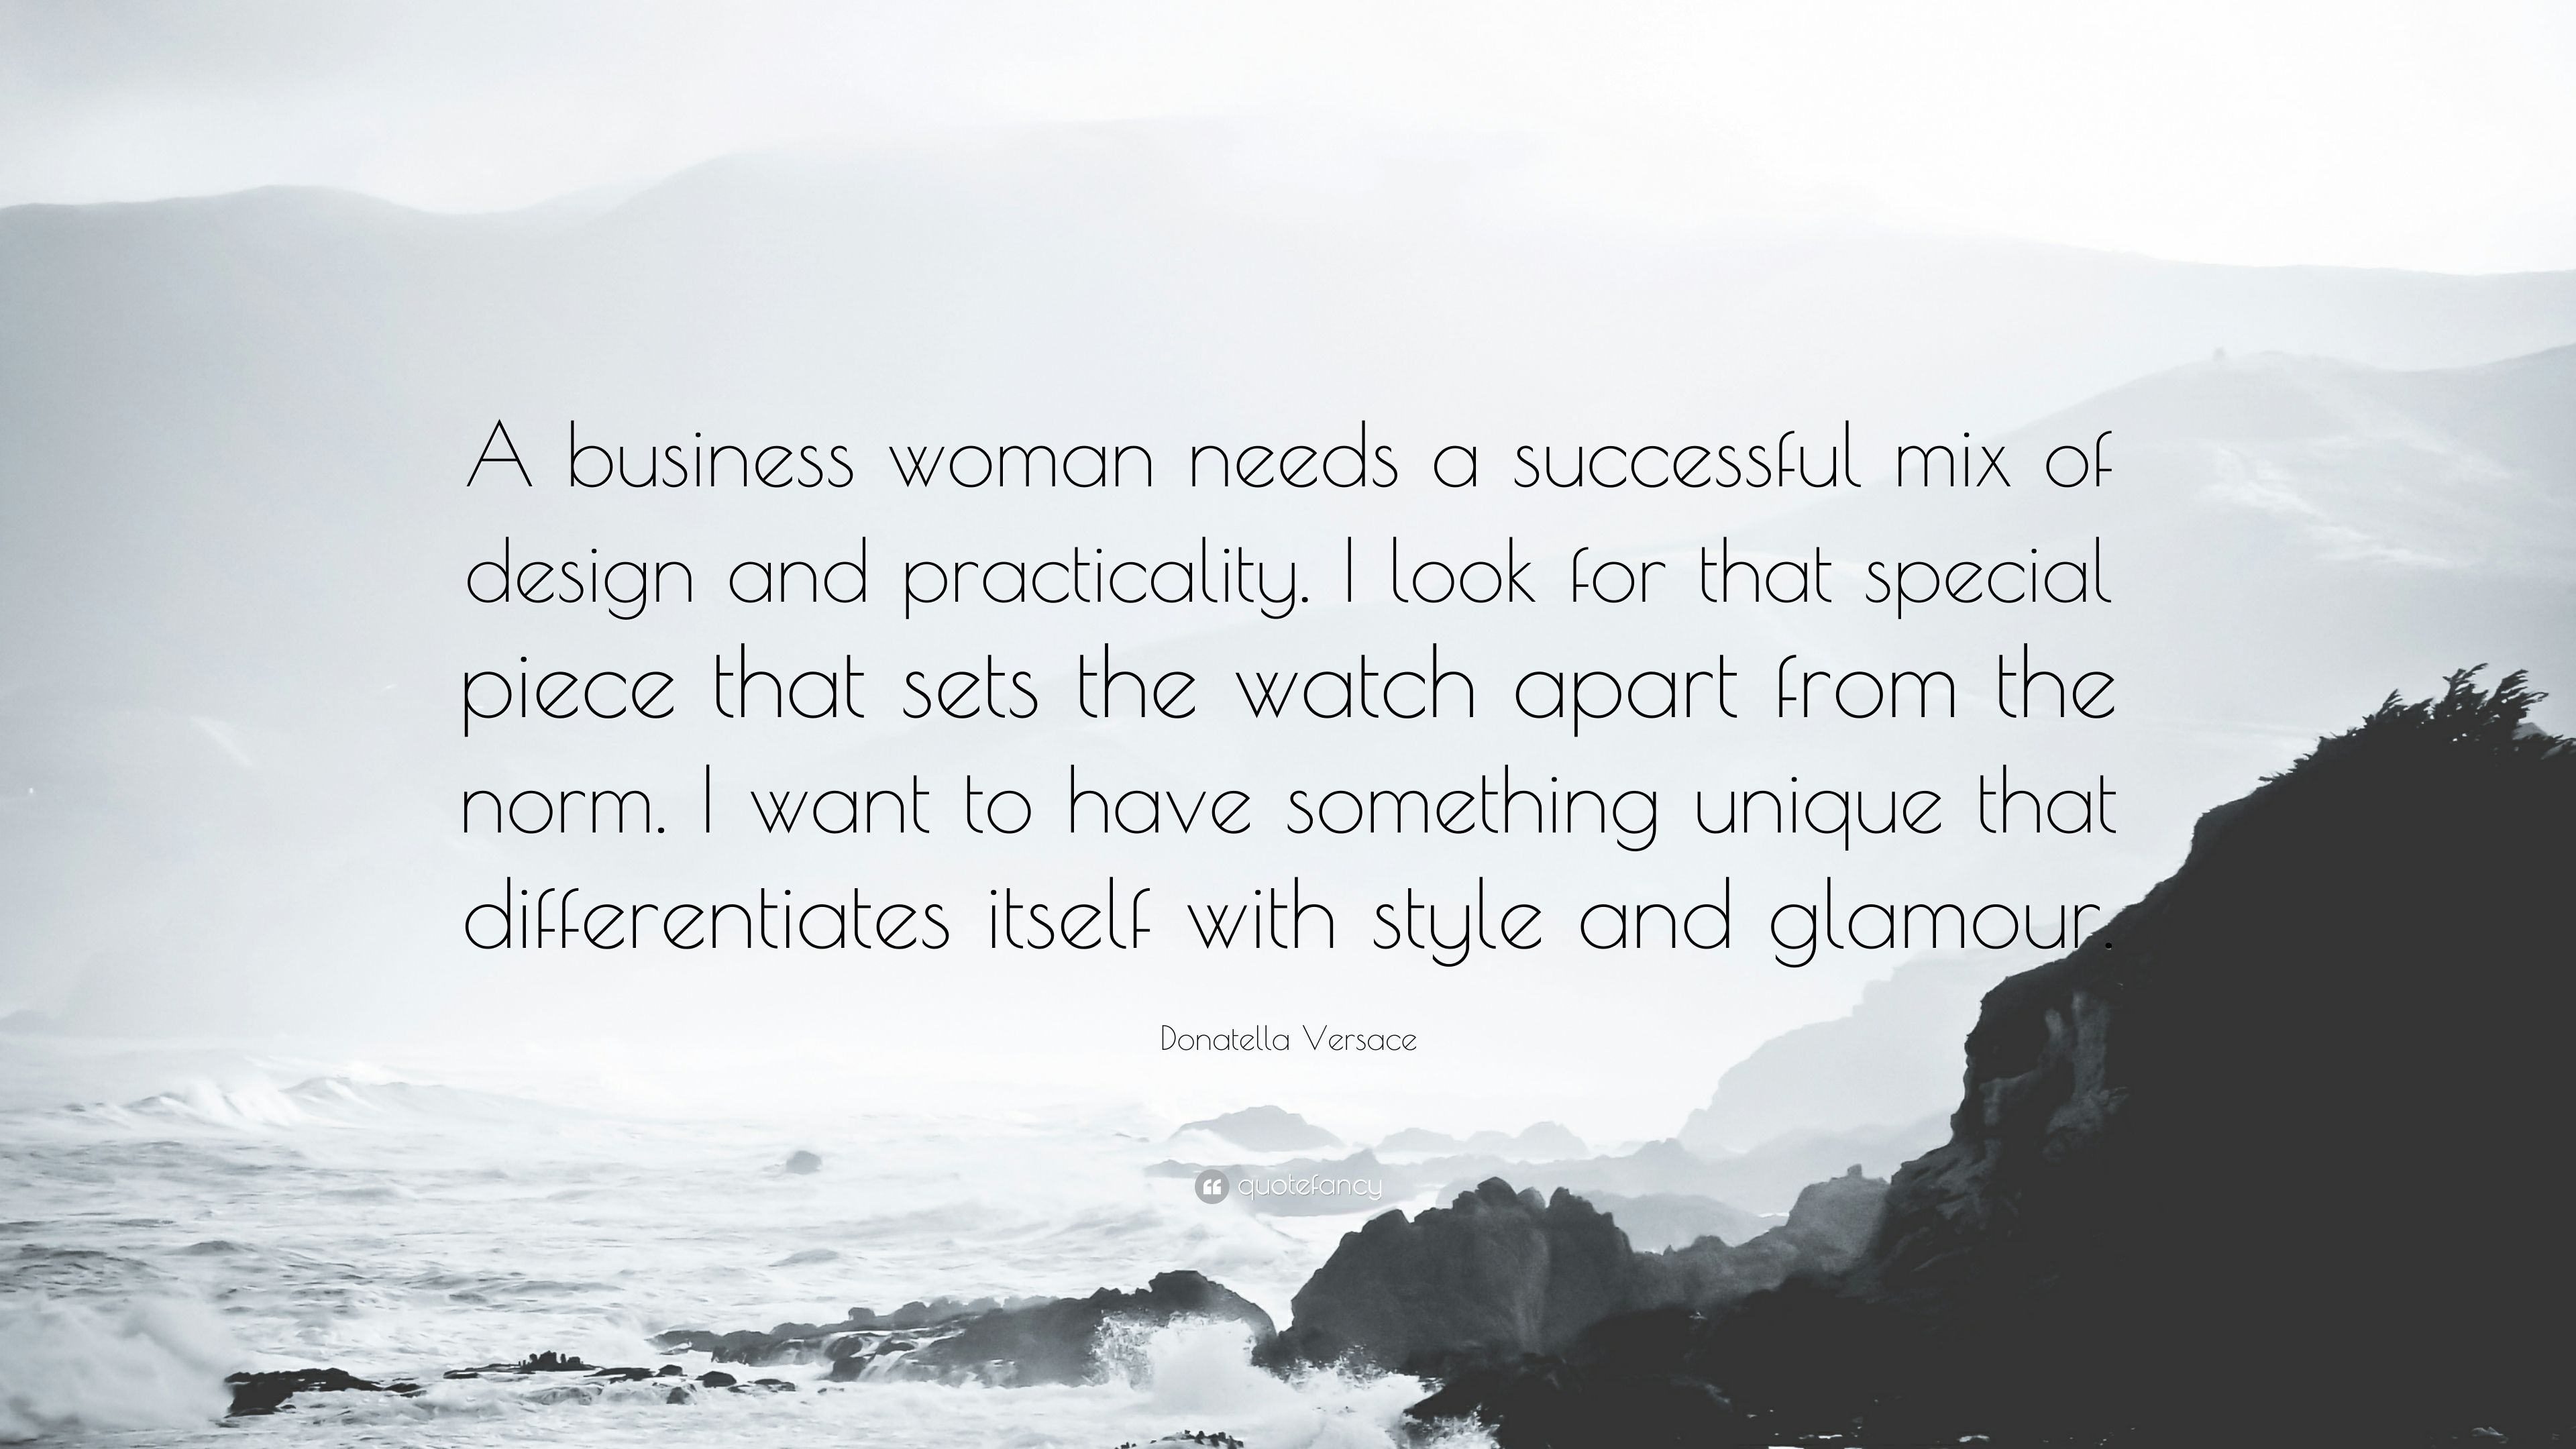 Donatella Versace Quote: “A business woman needs a successful mix of design and practicality. I look for that special piece that sets the watch ap.” (7 wallpaper)